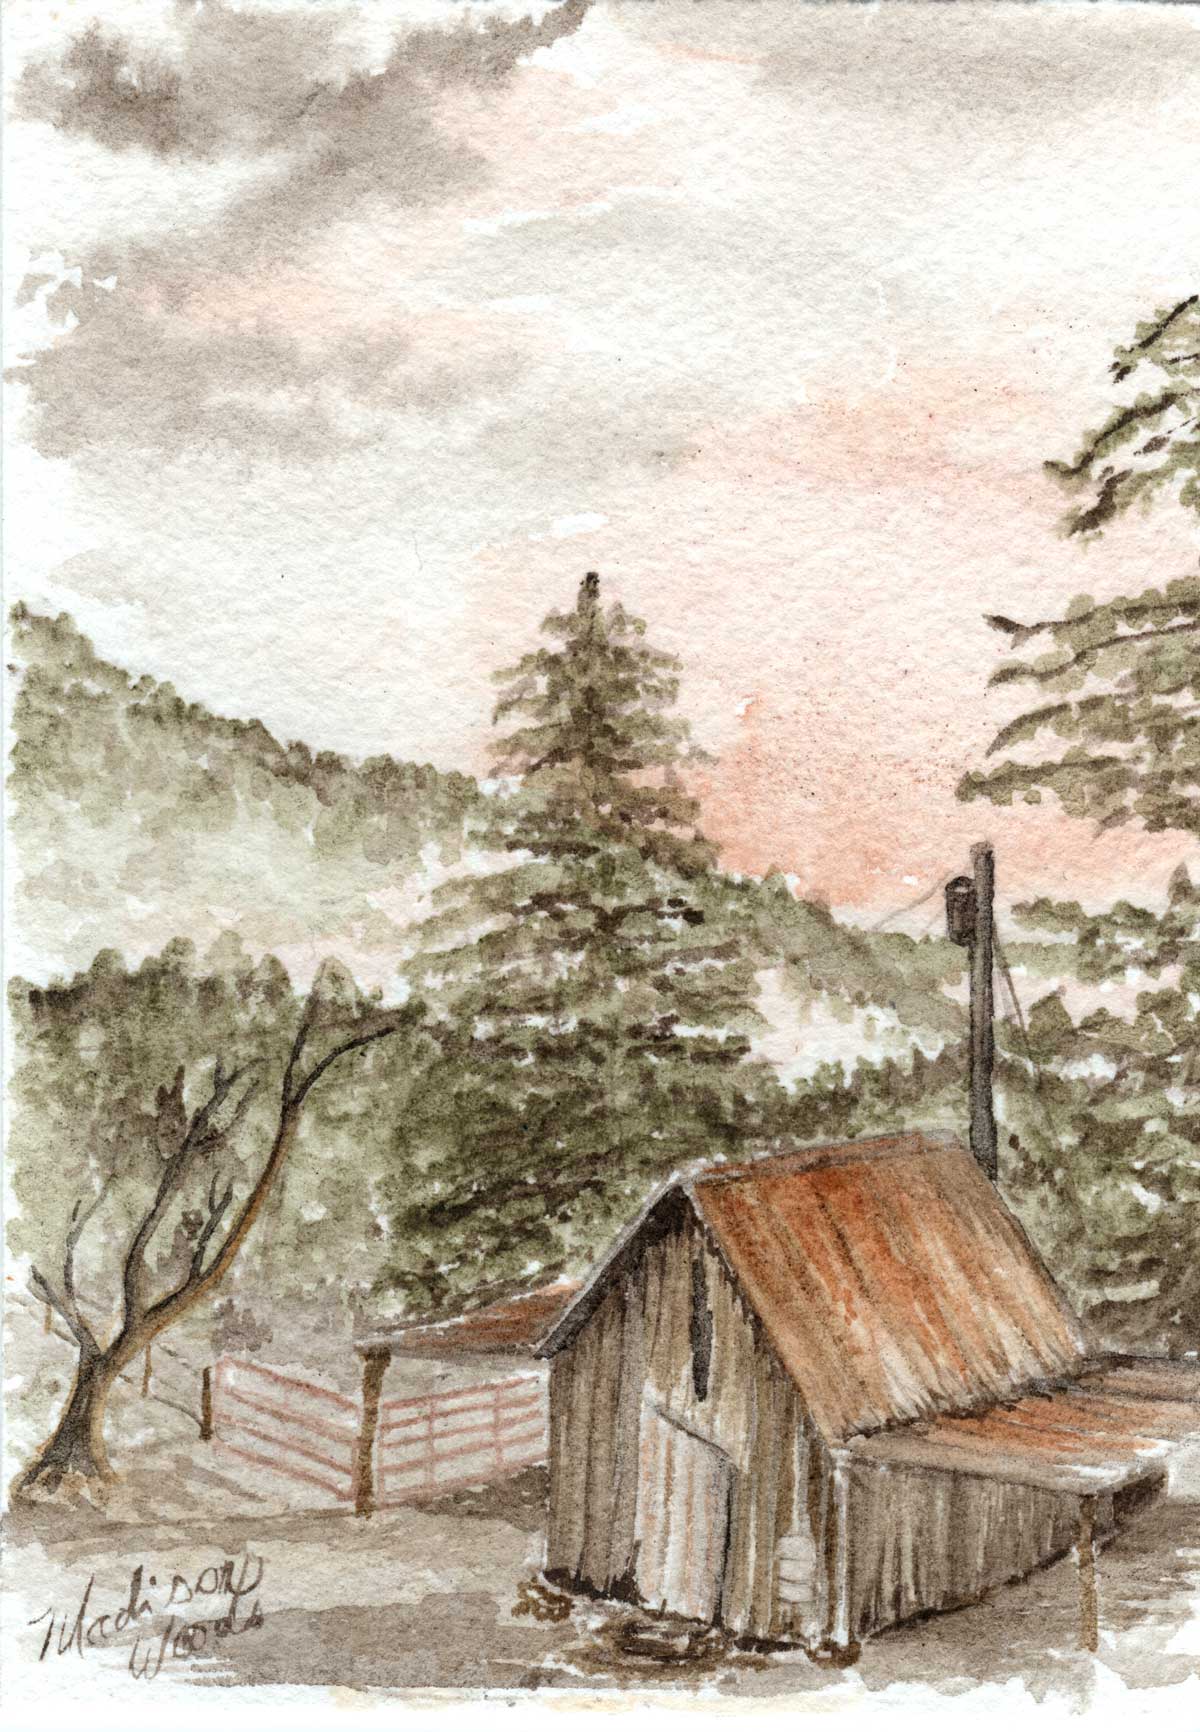 Painting of the old shed, by Madison Woods